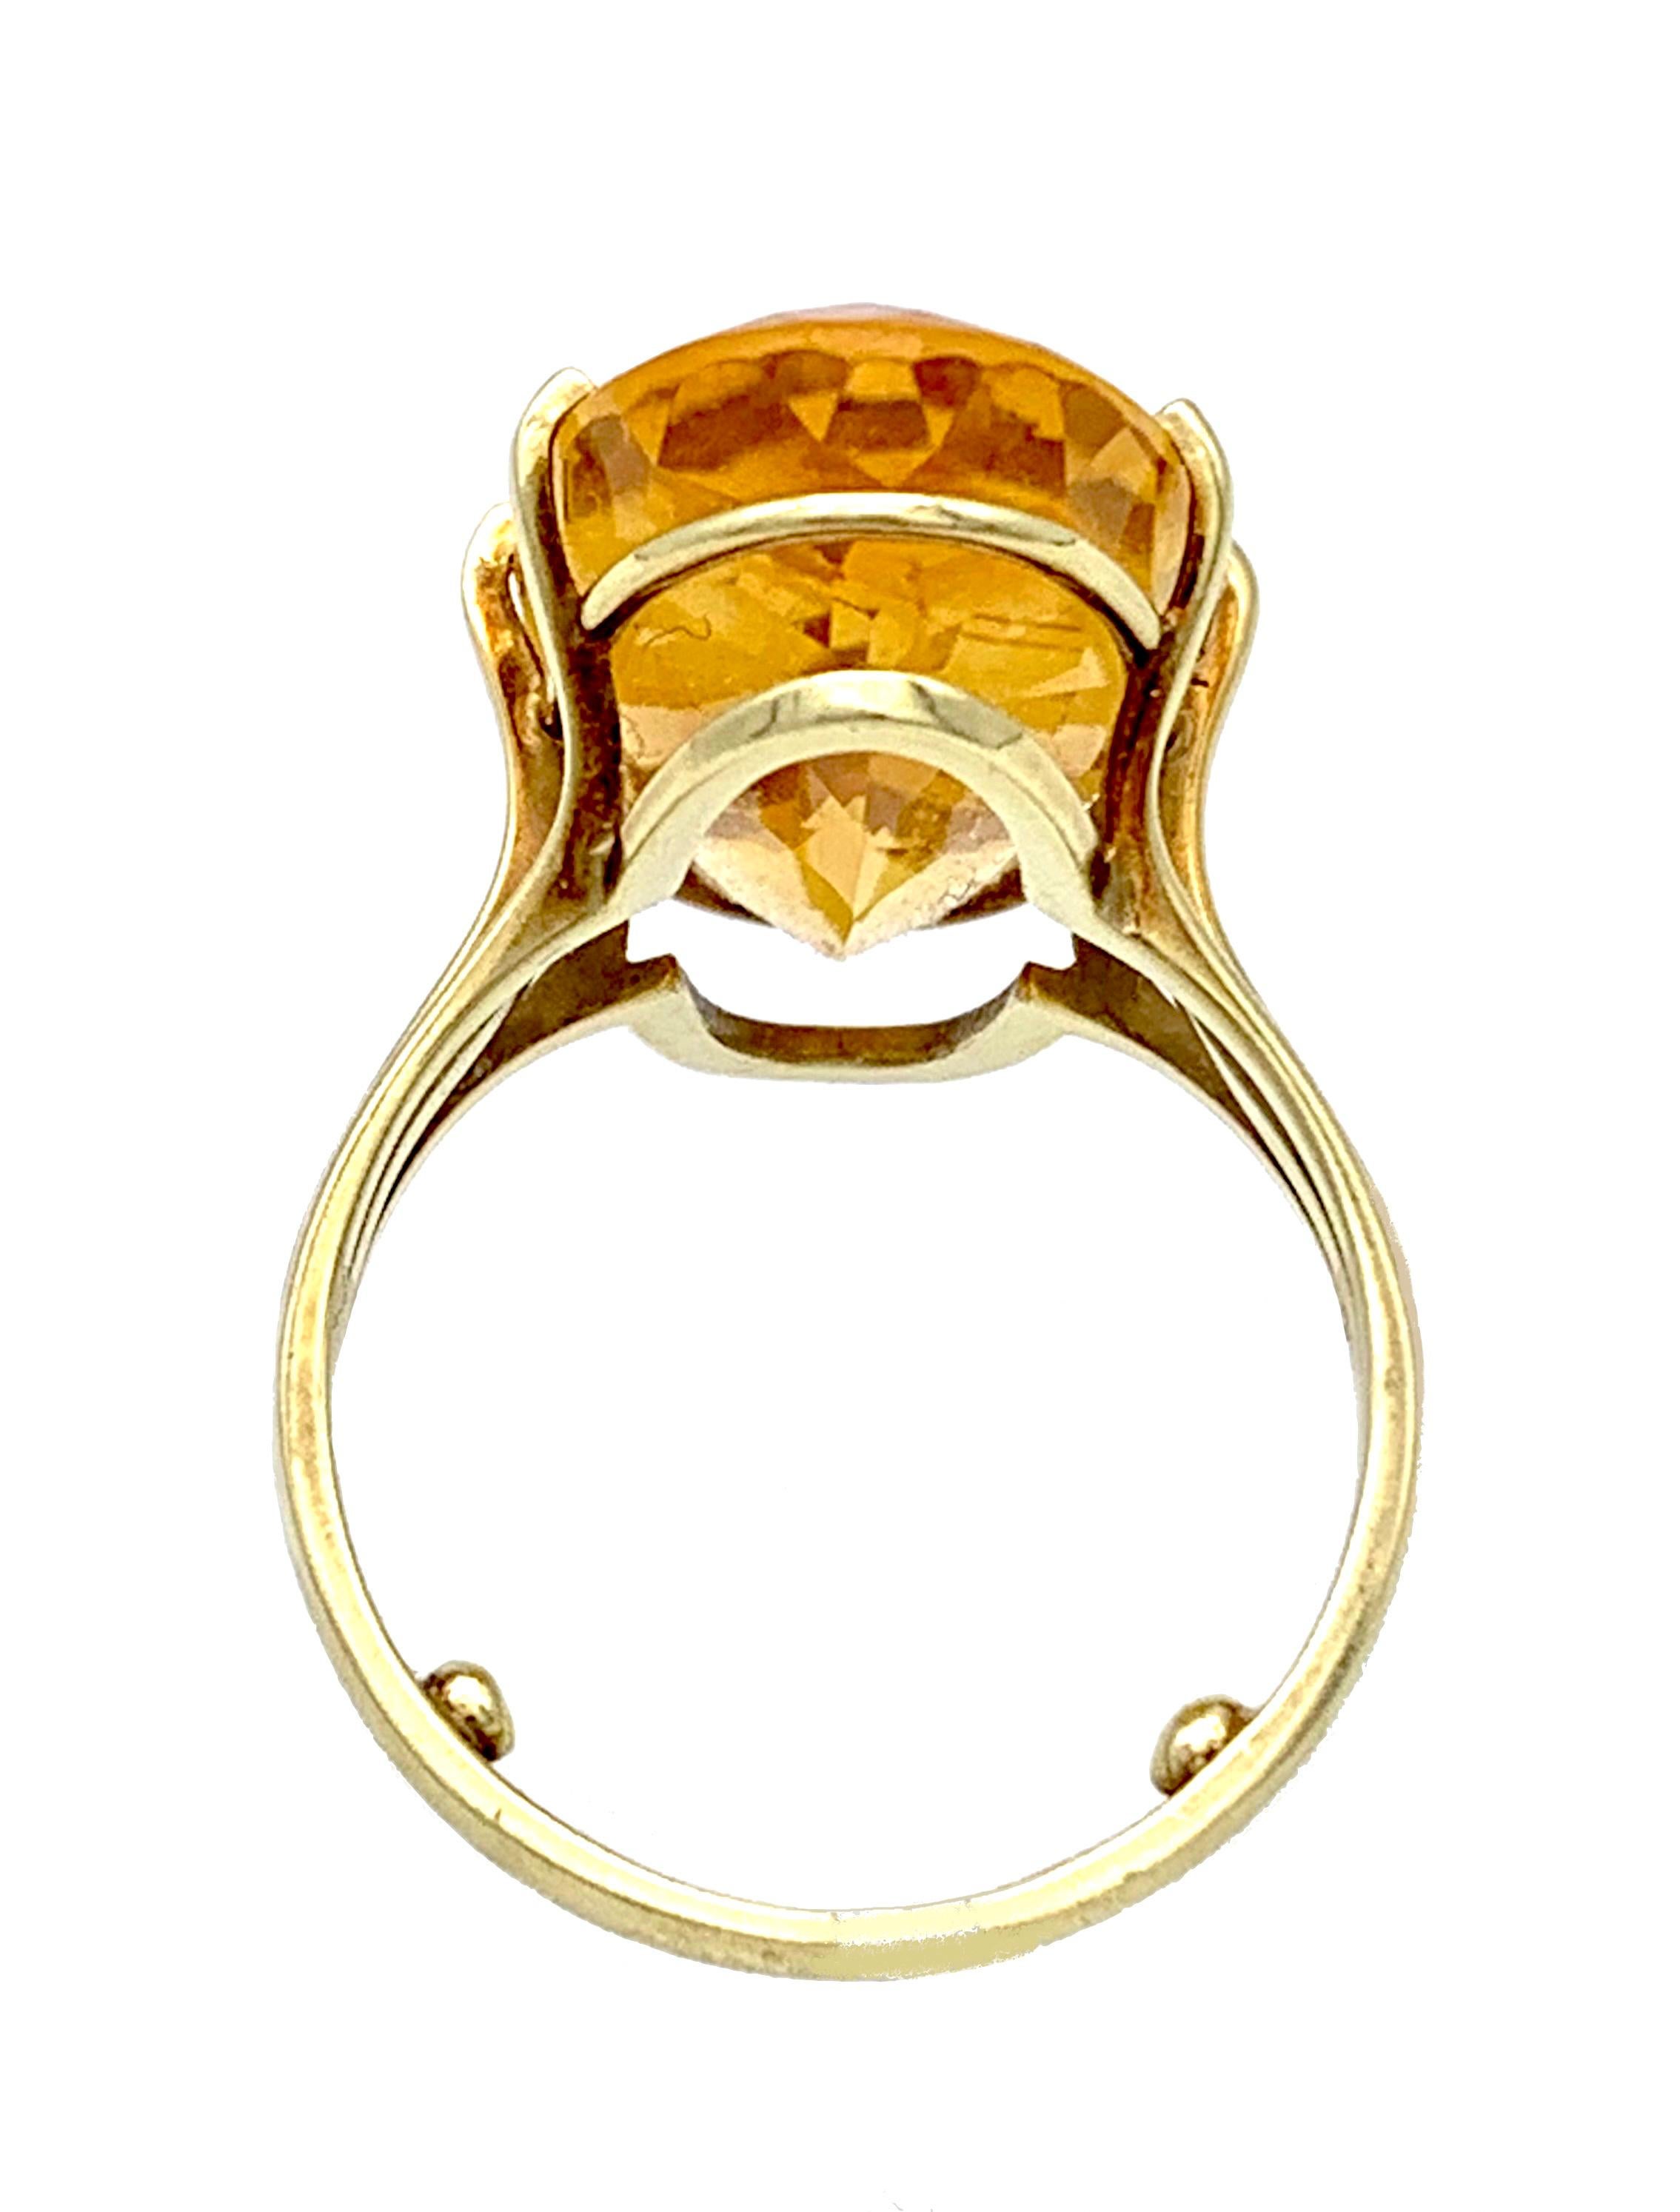 Vintage Dress Ring Oval Cut Yellow Citrine 14 Karat Gold In Good Condition For Sale In Munich, Bavaria